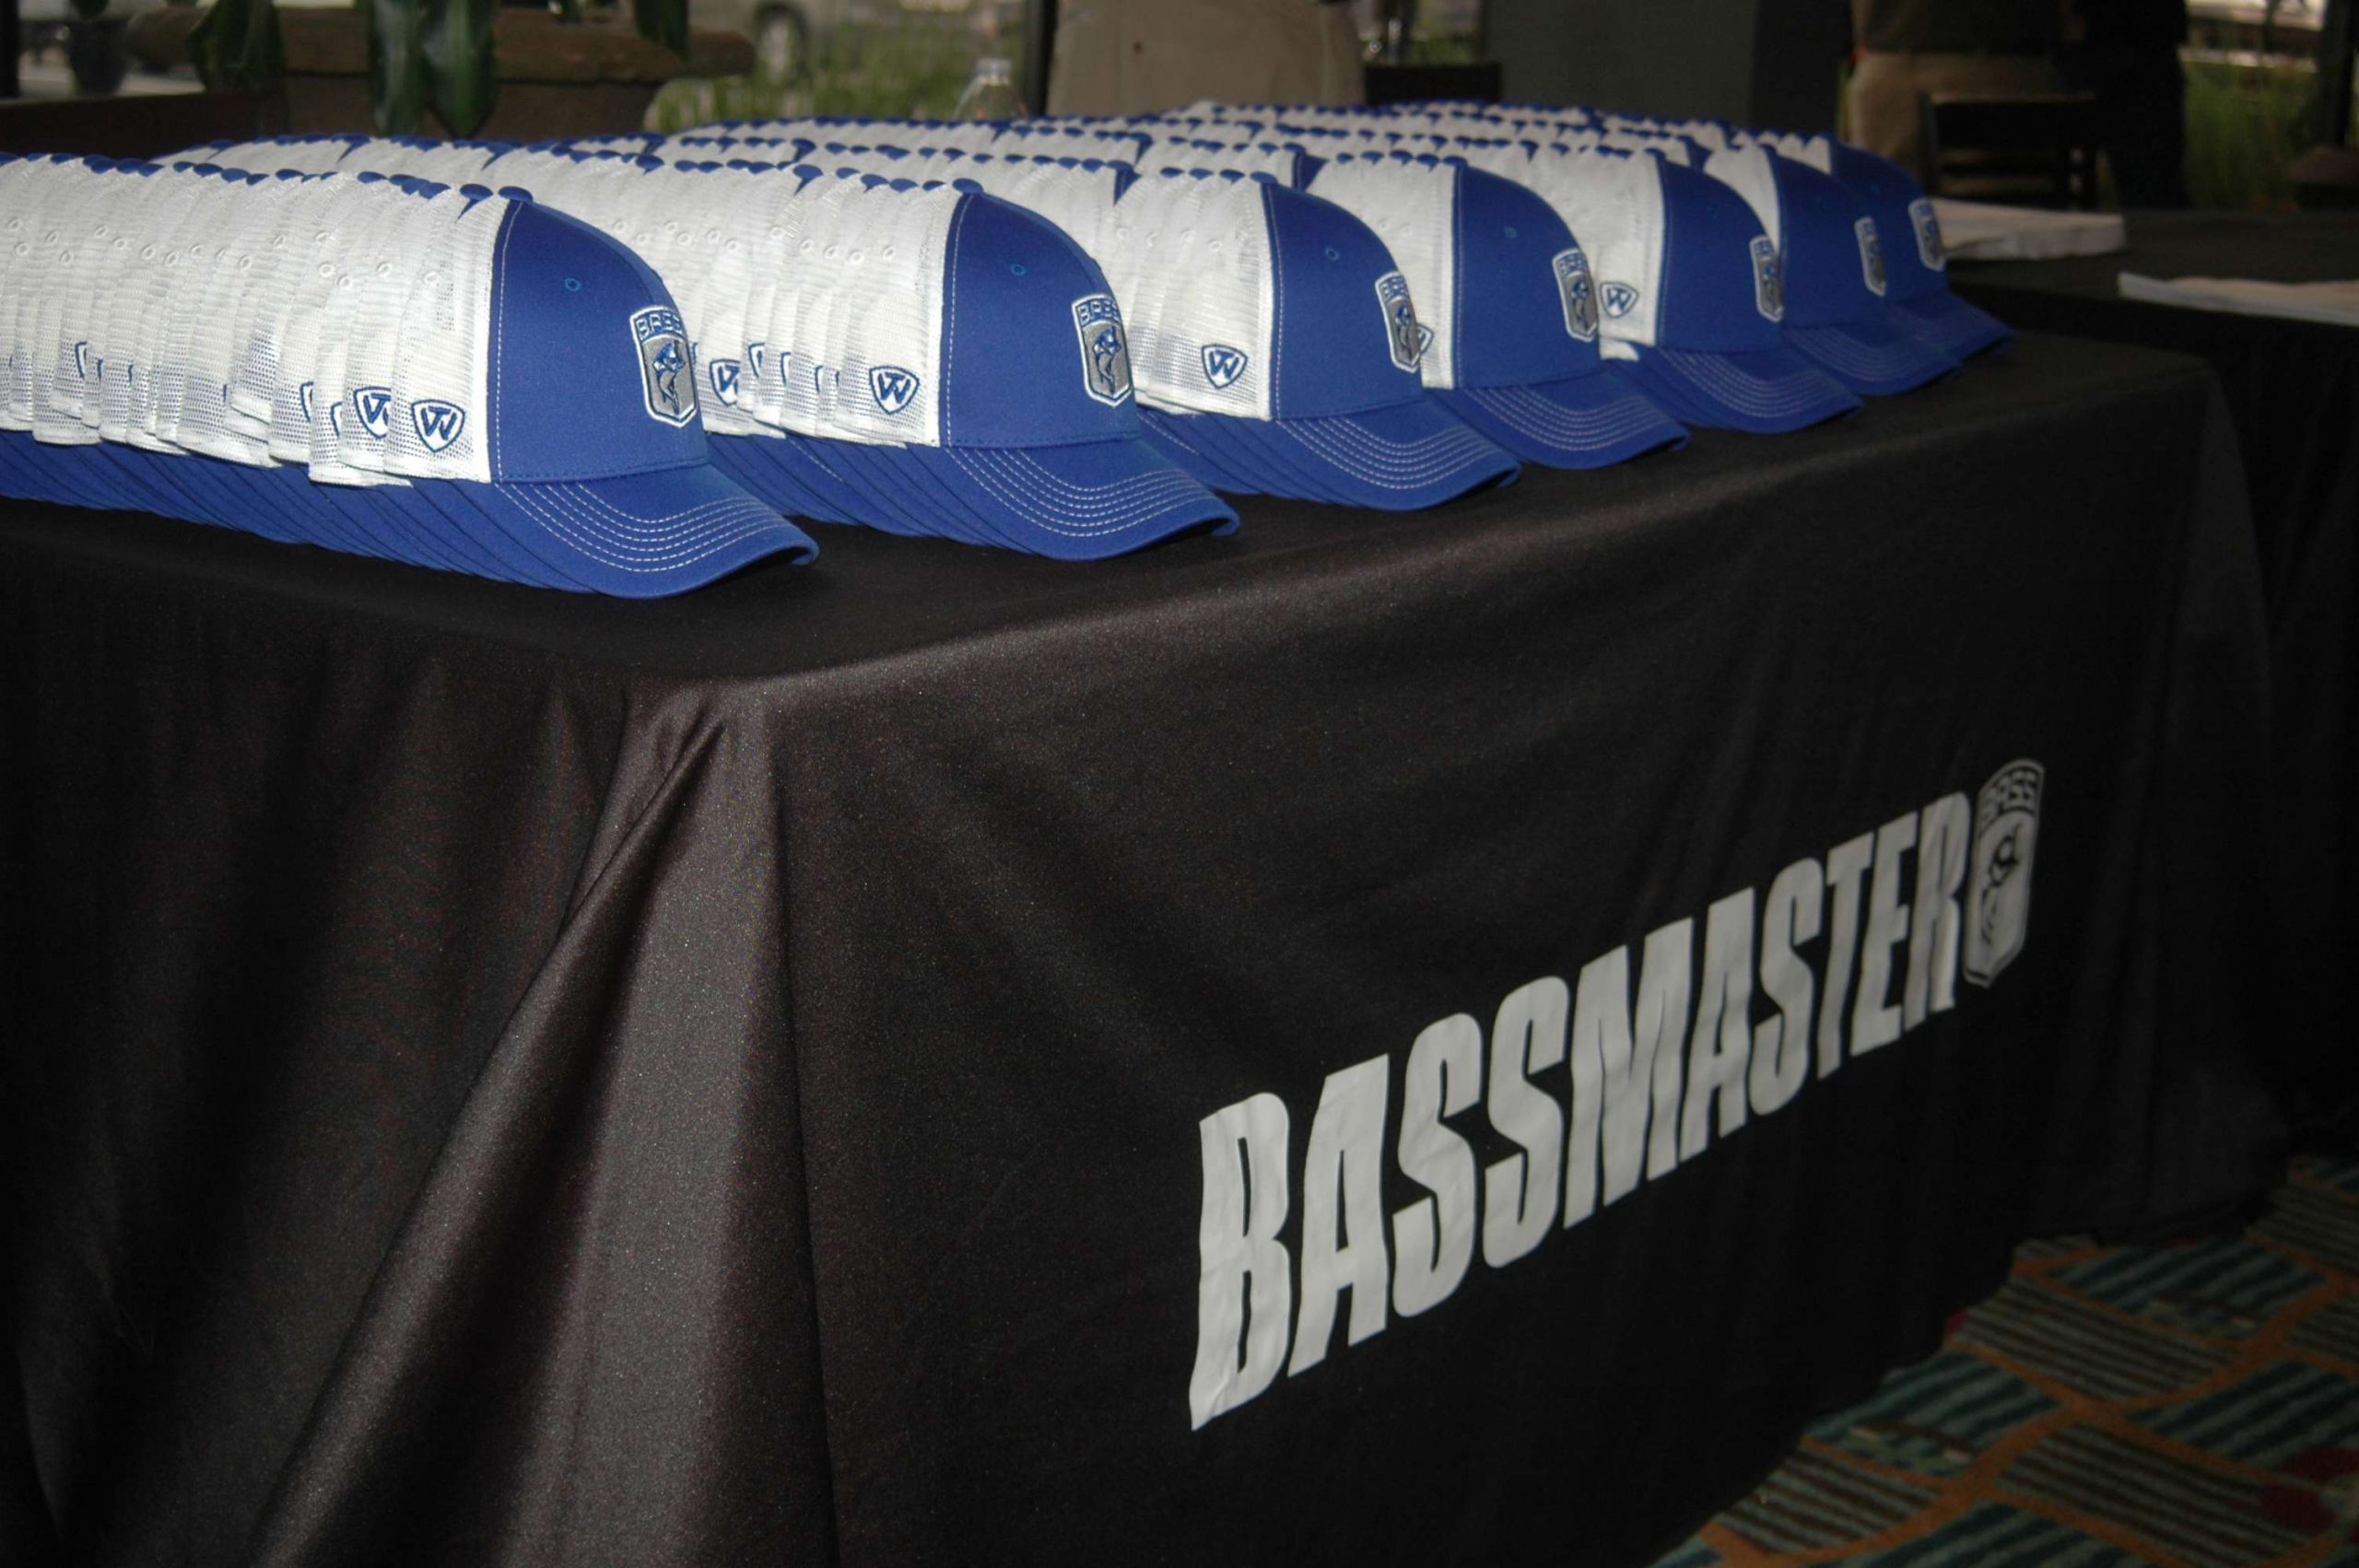 Bassmaster hats were also free to the college anglers during registration.